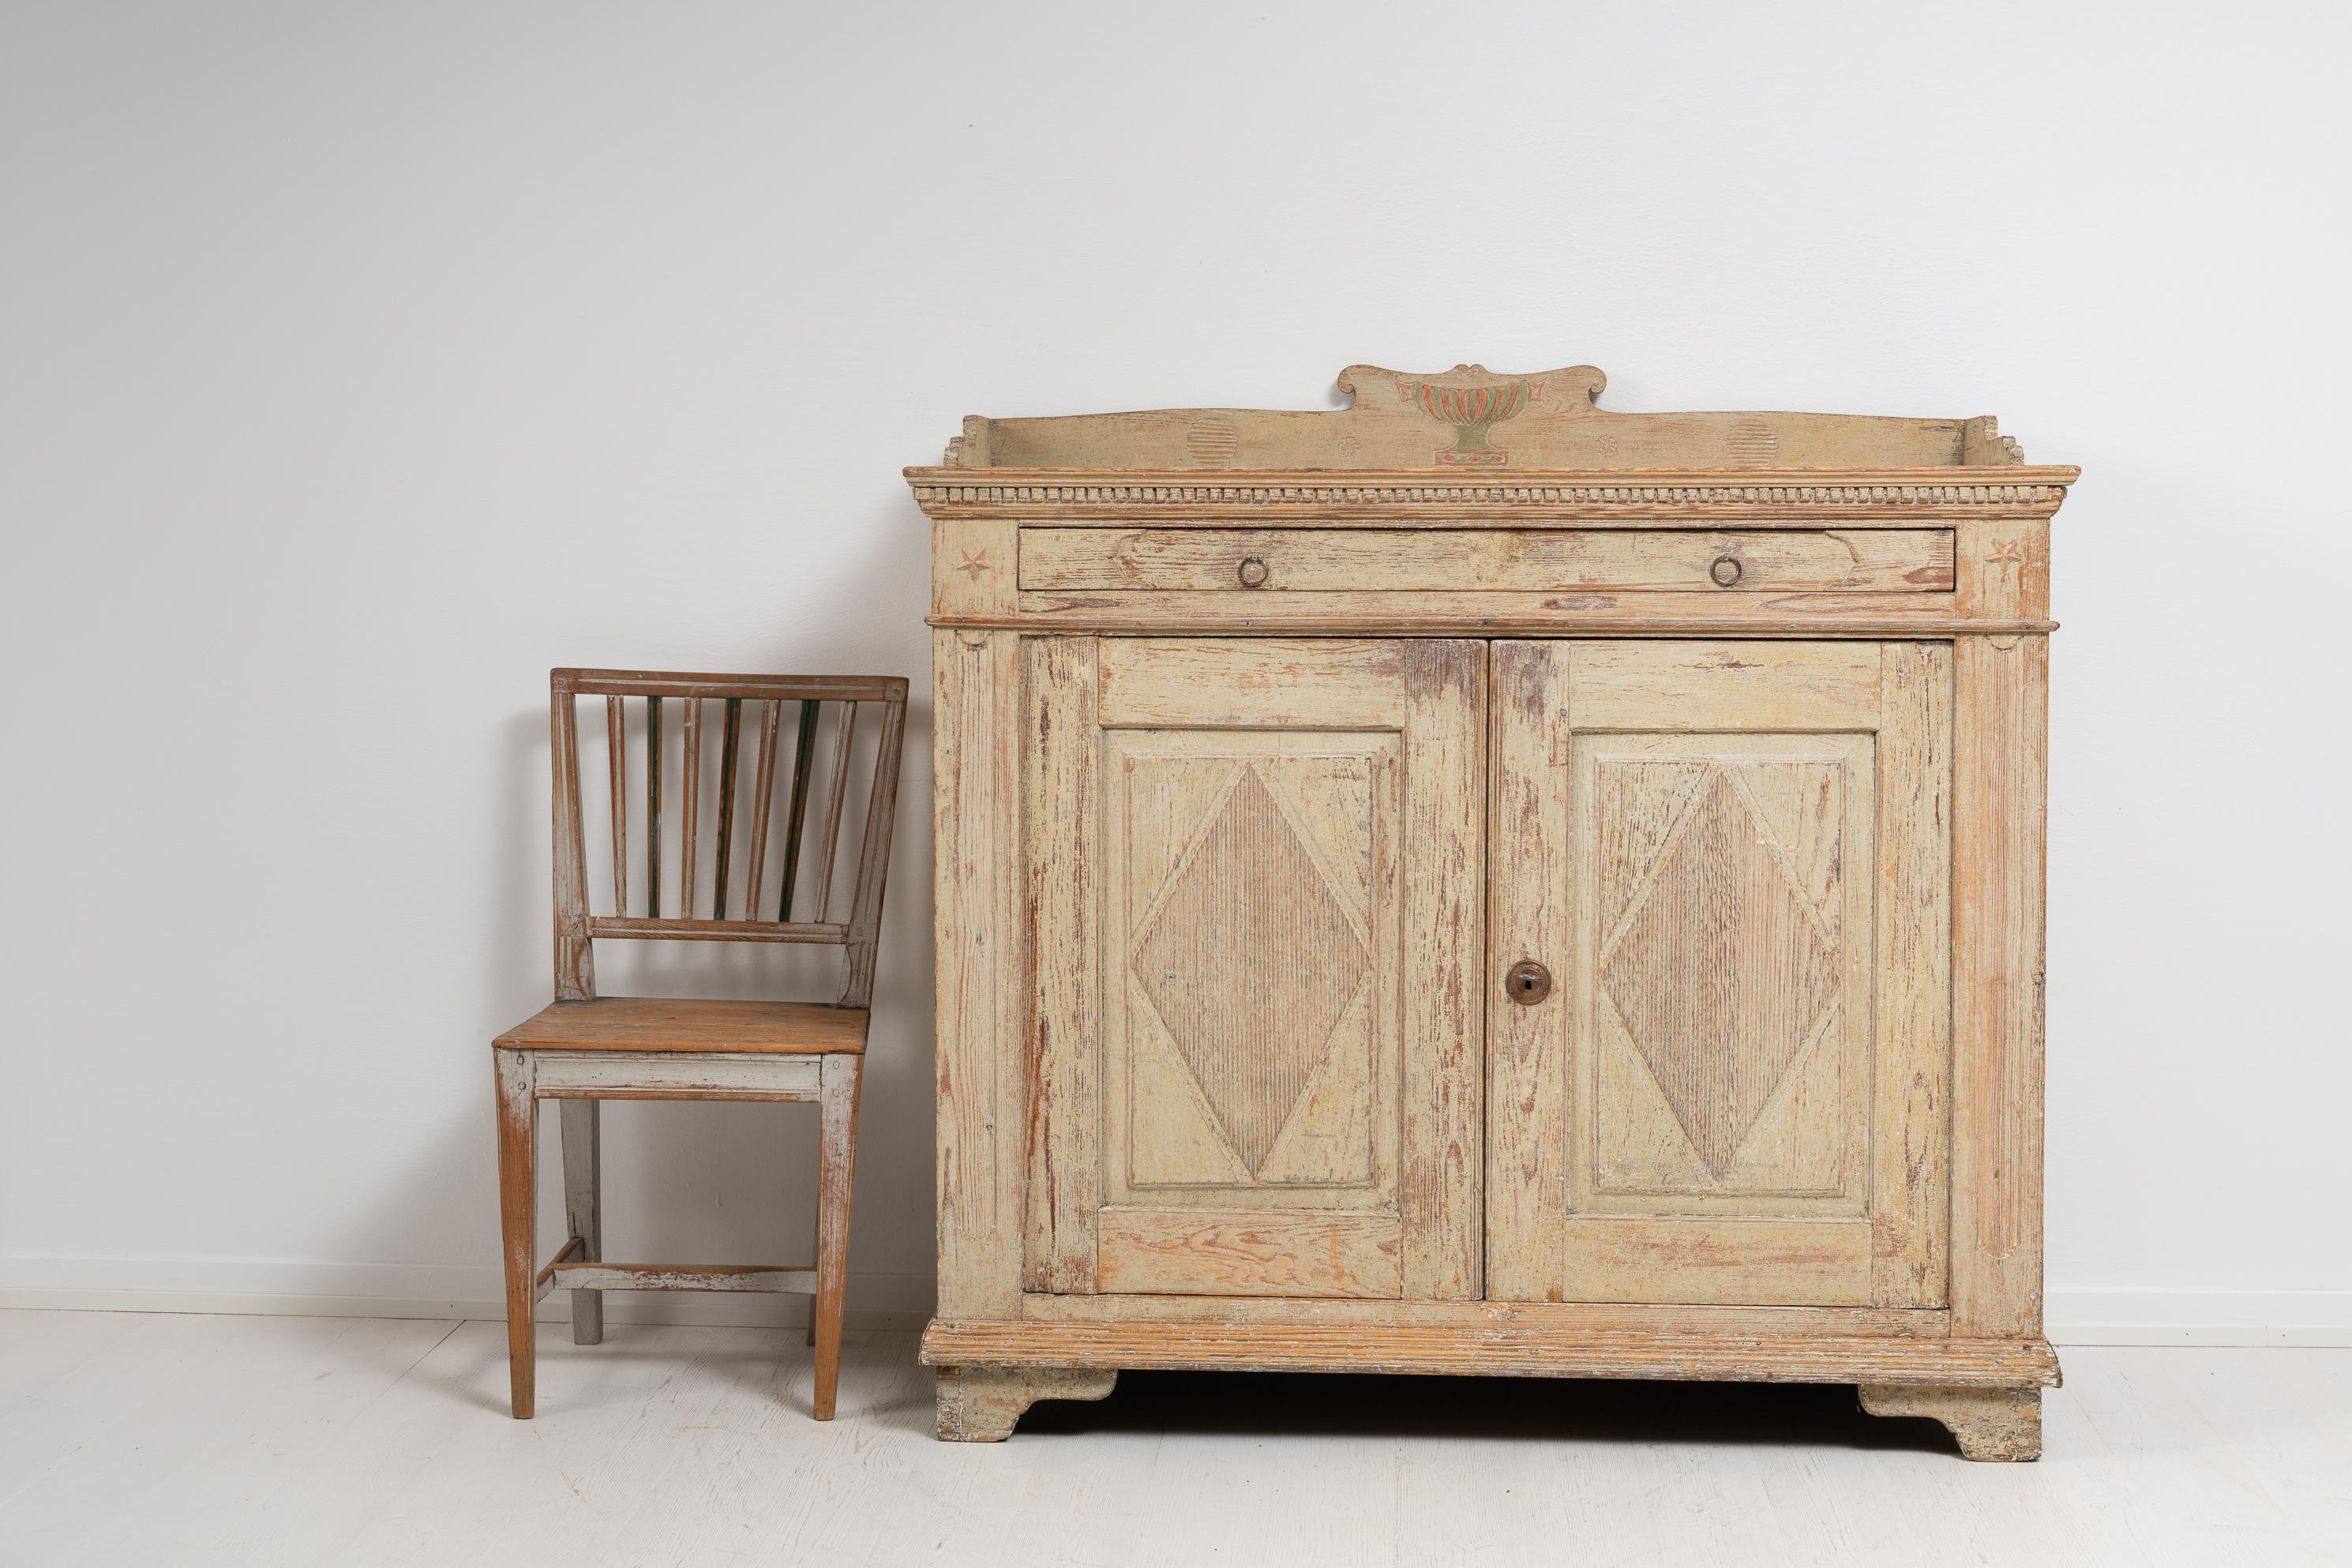 Swedish unusual and genuine sideboard from around year 1800 in the transitional time between the gustavian and empire periods. The sideboard was made in northern Sweden in pine and has the original paint from the first few years of the 19th